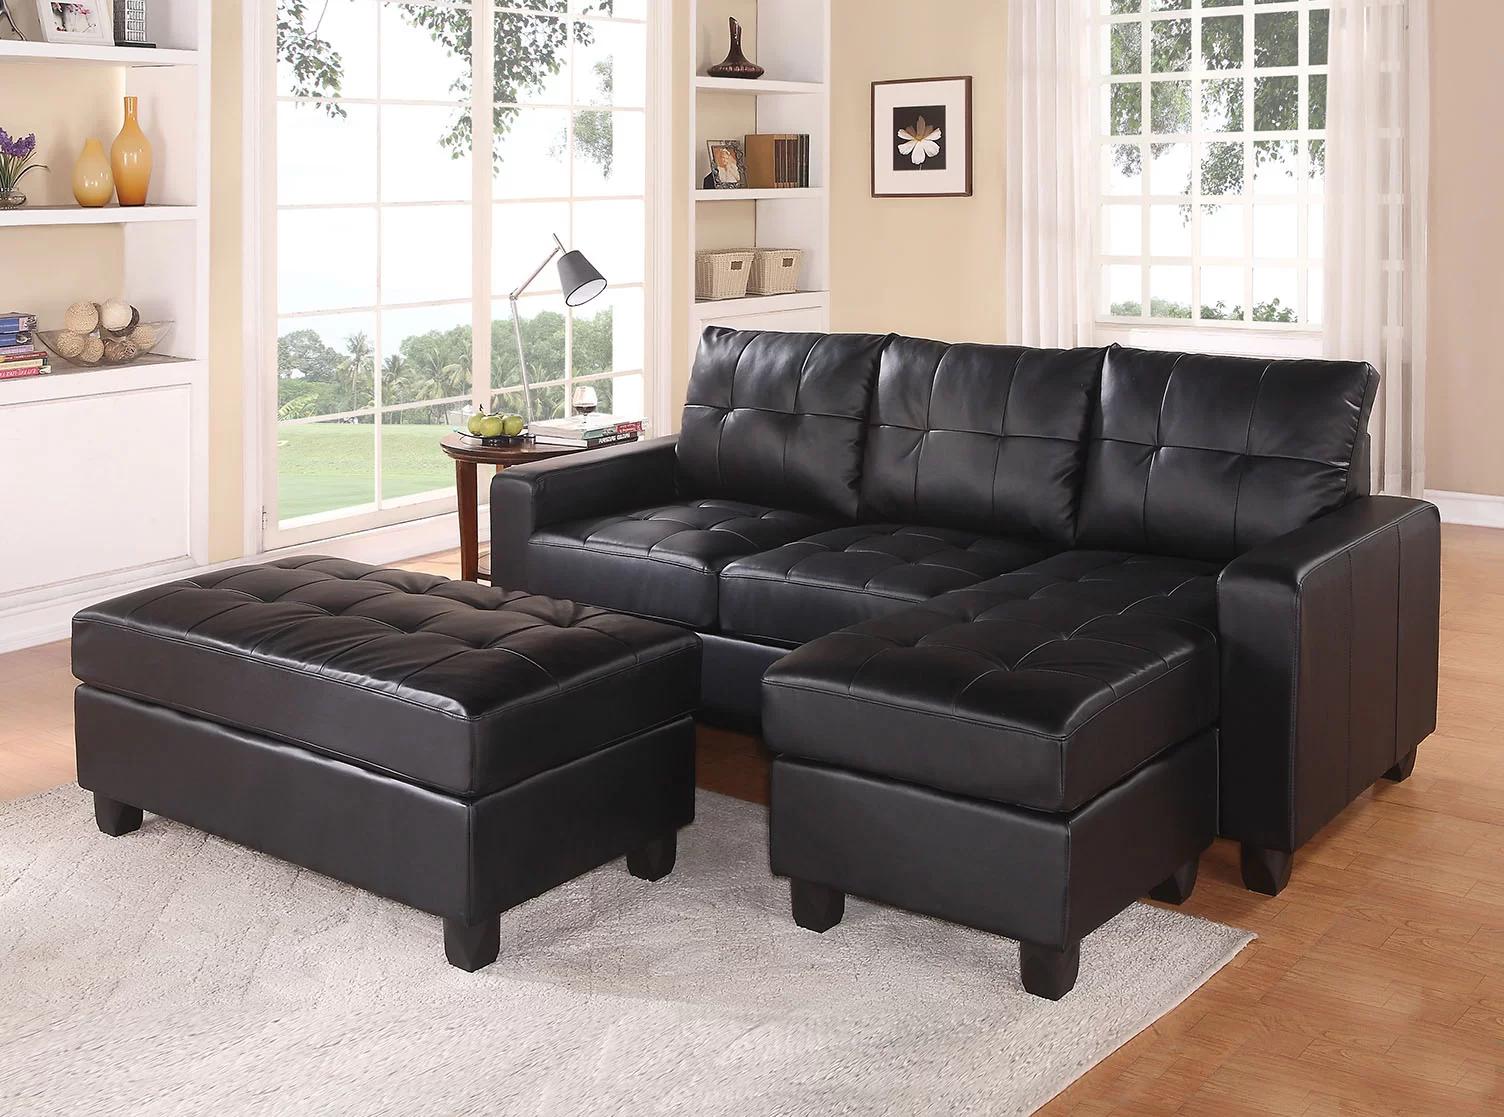 

    
Contemporary Black Bonded Leather Match Sectional Sofa & Ottoman by Acme Lyssa 51215-3pcs
